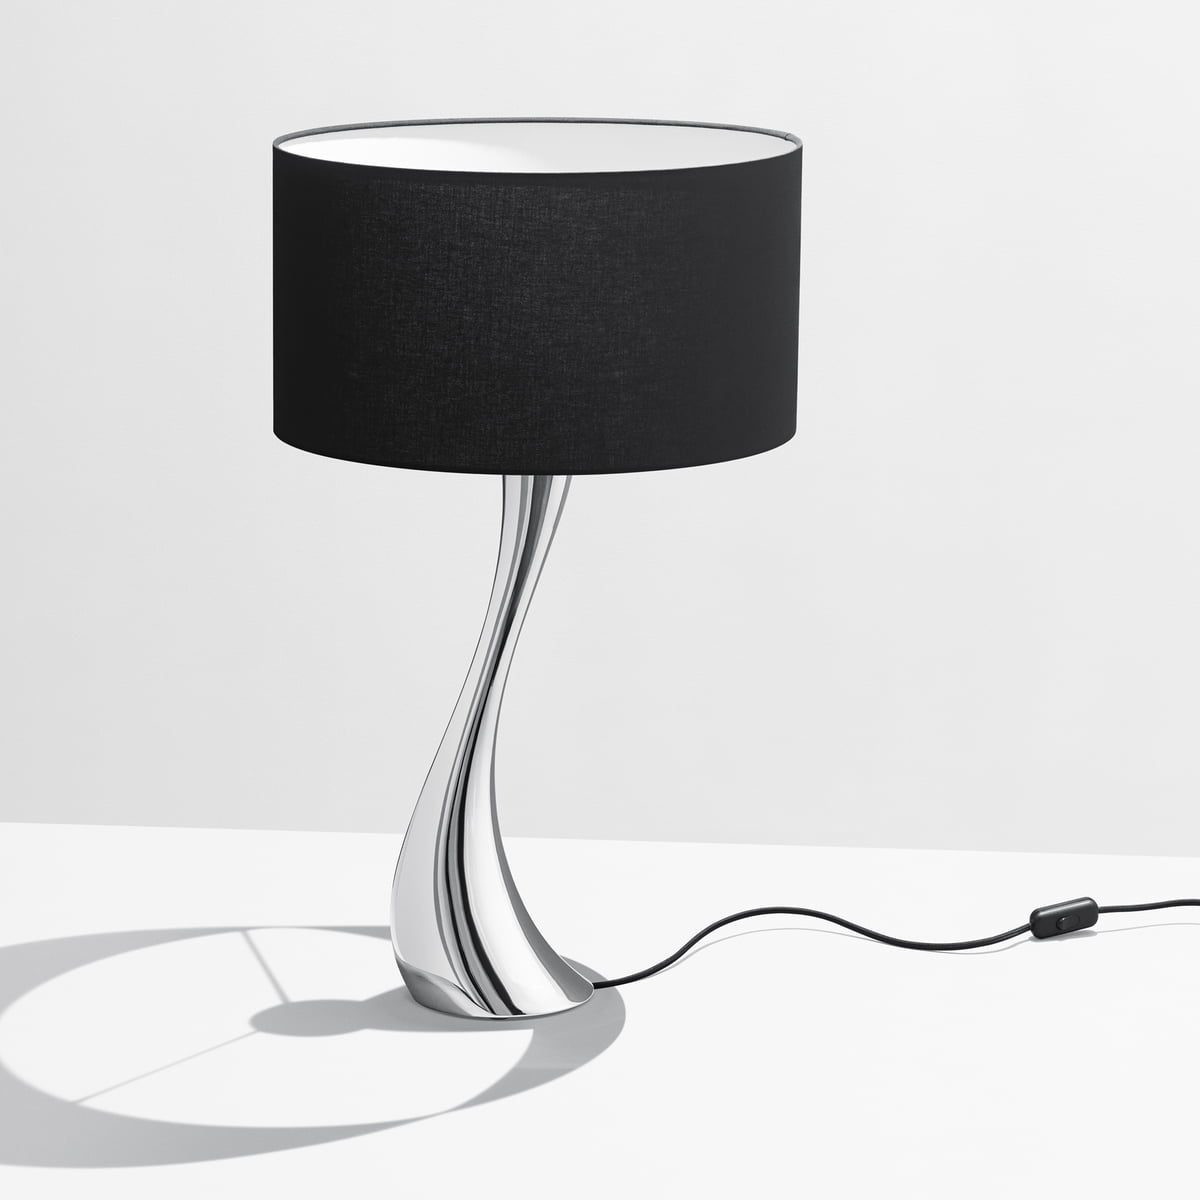 at klemme krog Konkurrere The Cobra Table Lamp by Georg Jensen in the shop